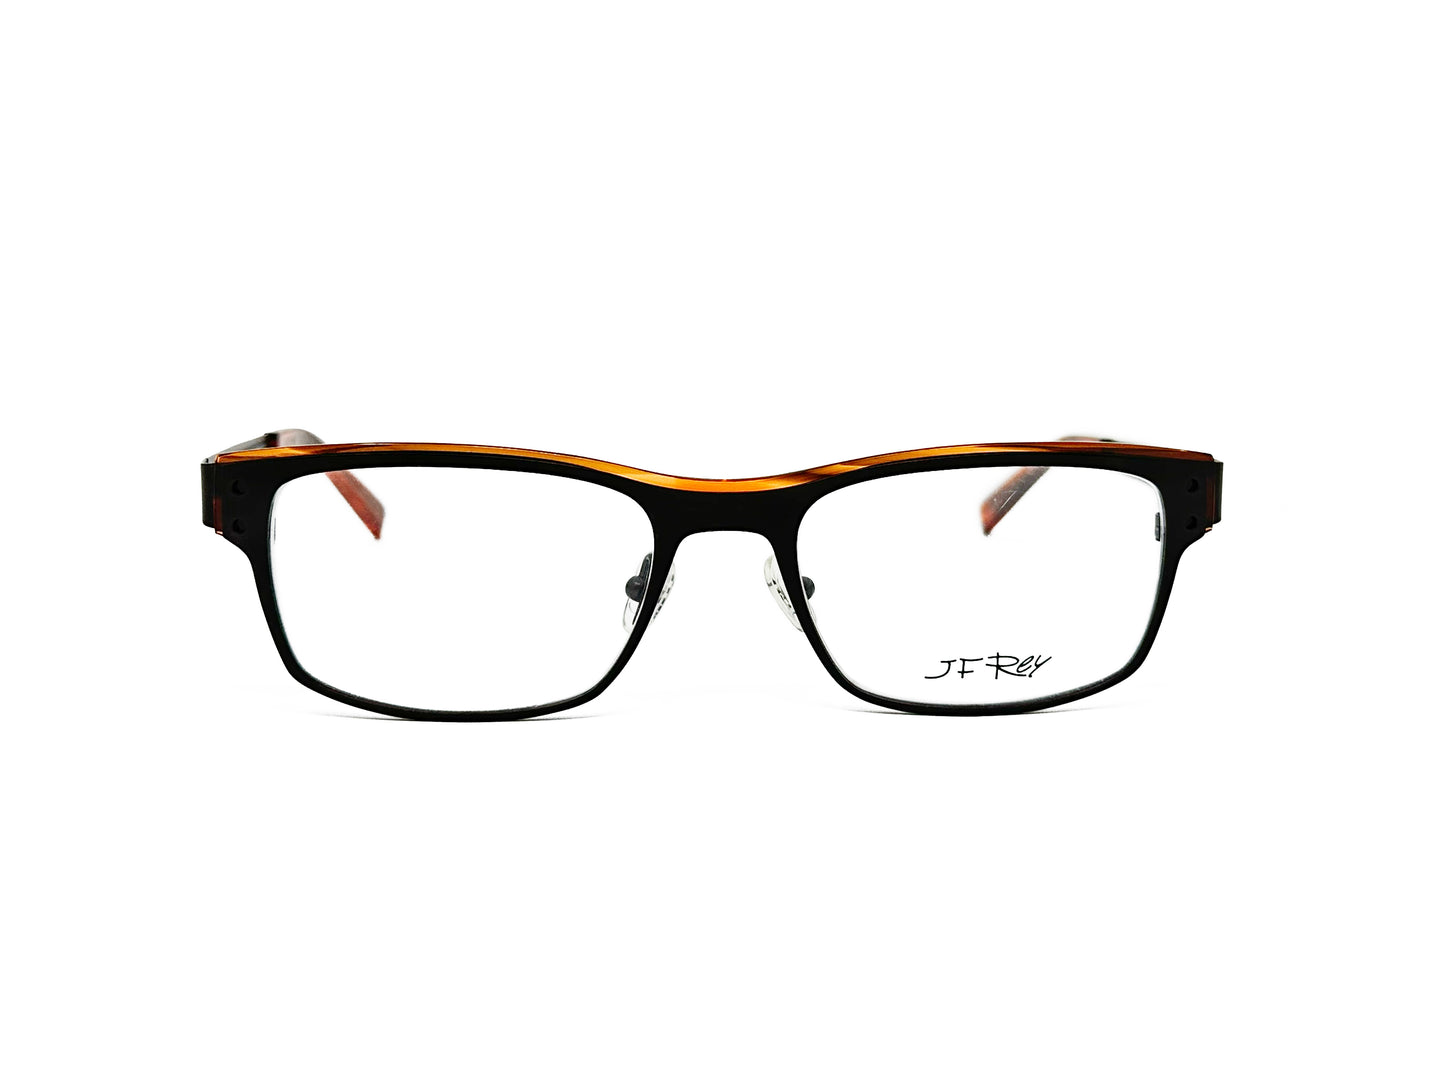 JF Rey rectangular, acetate, optical farme with amber sliver on top. Model: JF2553. Color: 9060 - Black with amber accent. Front view. 